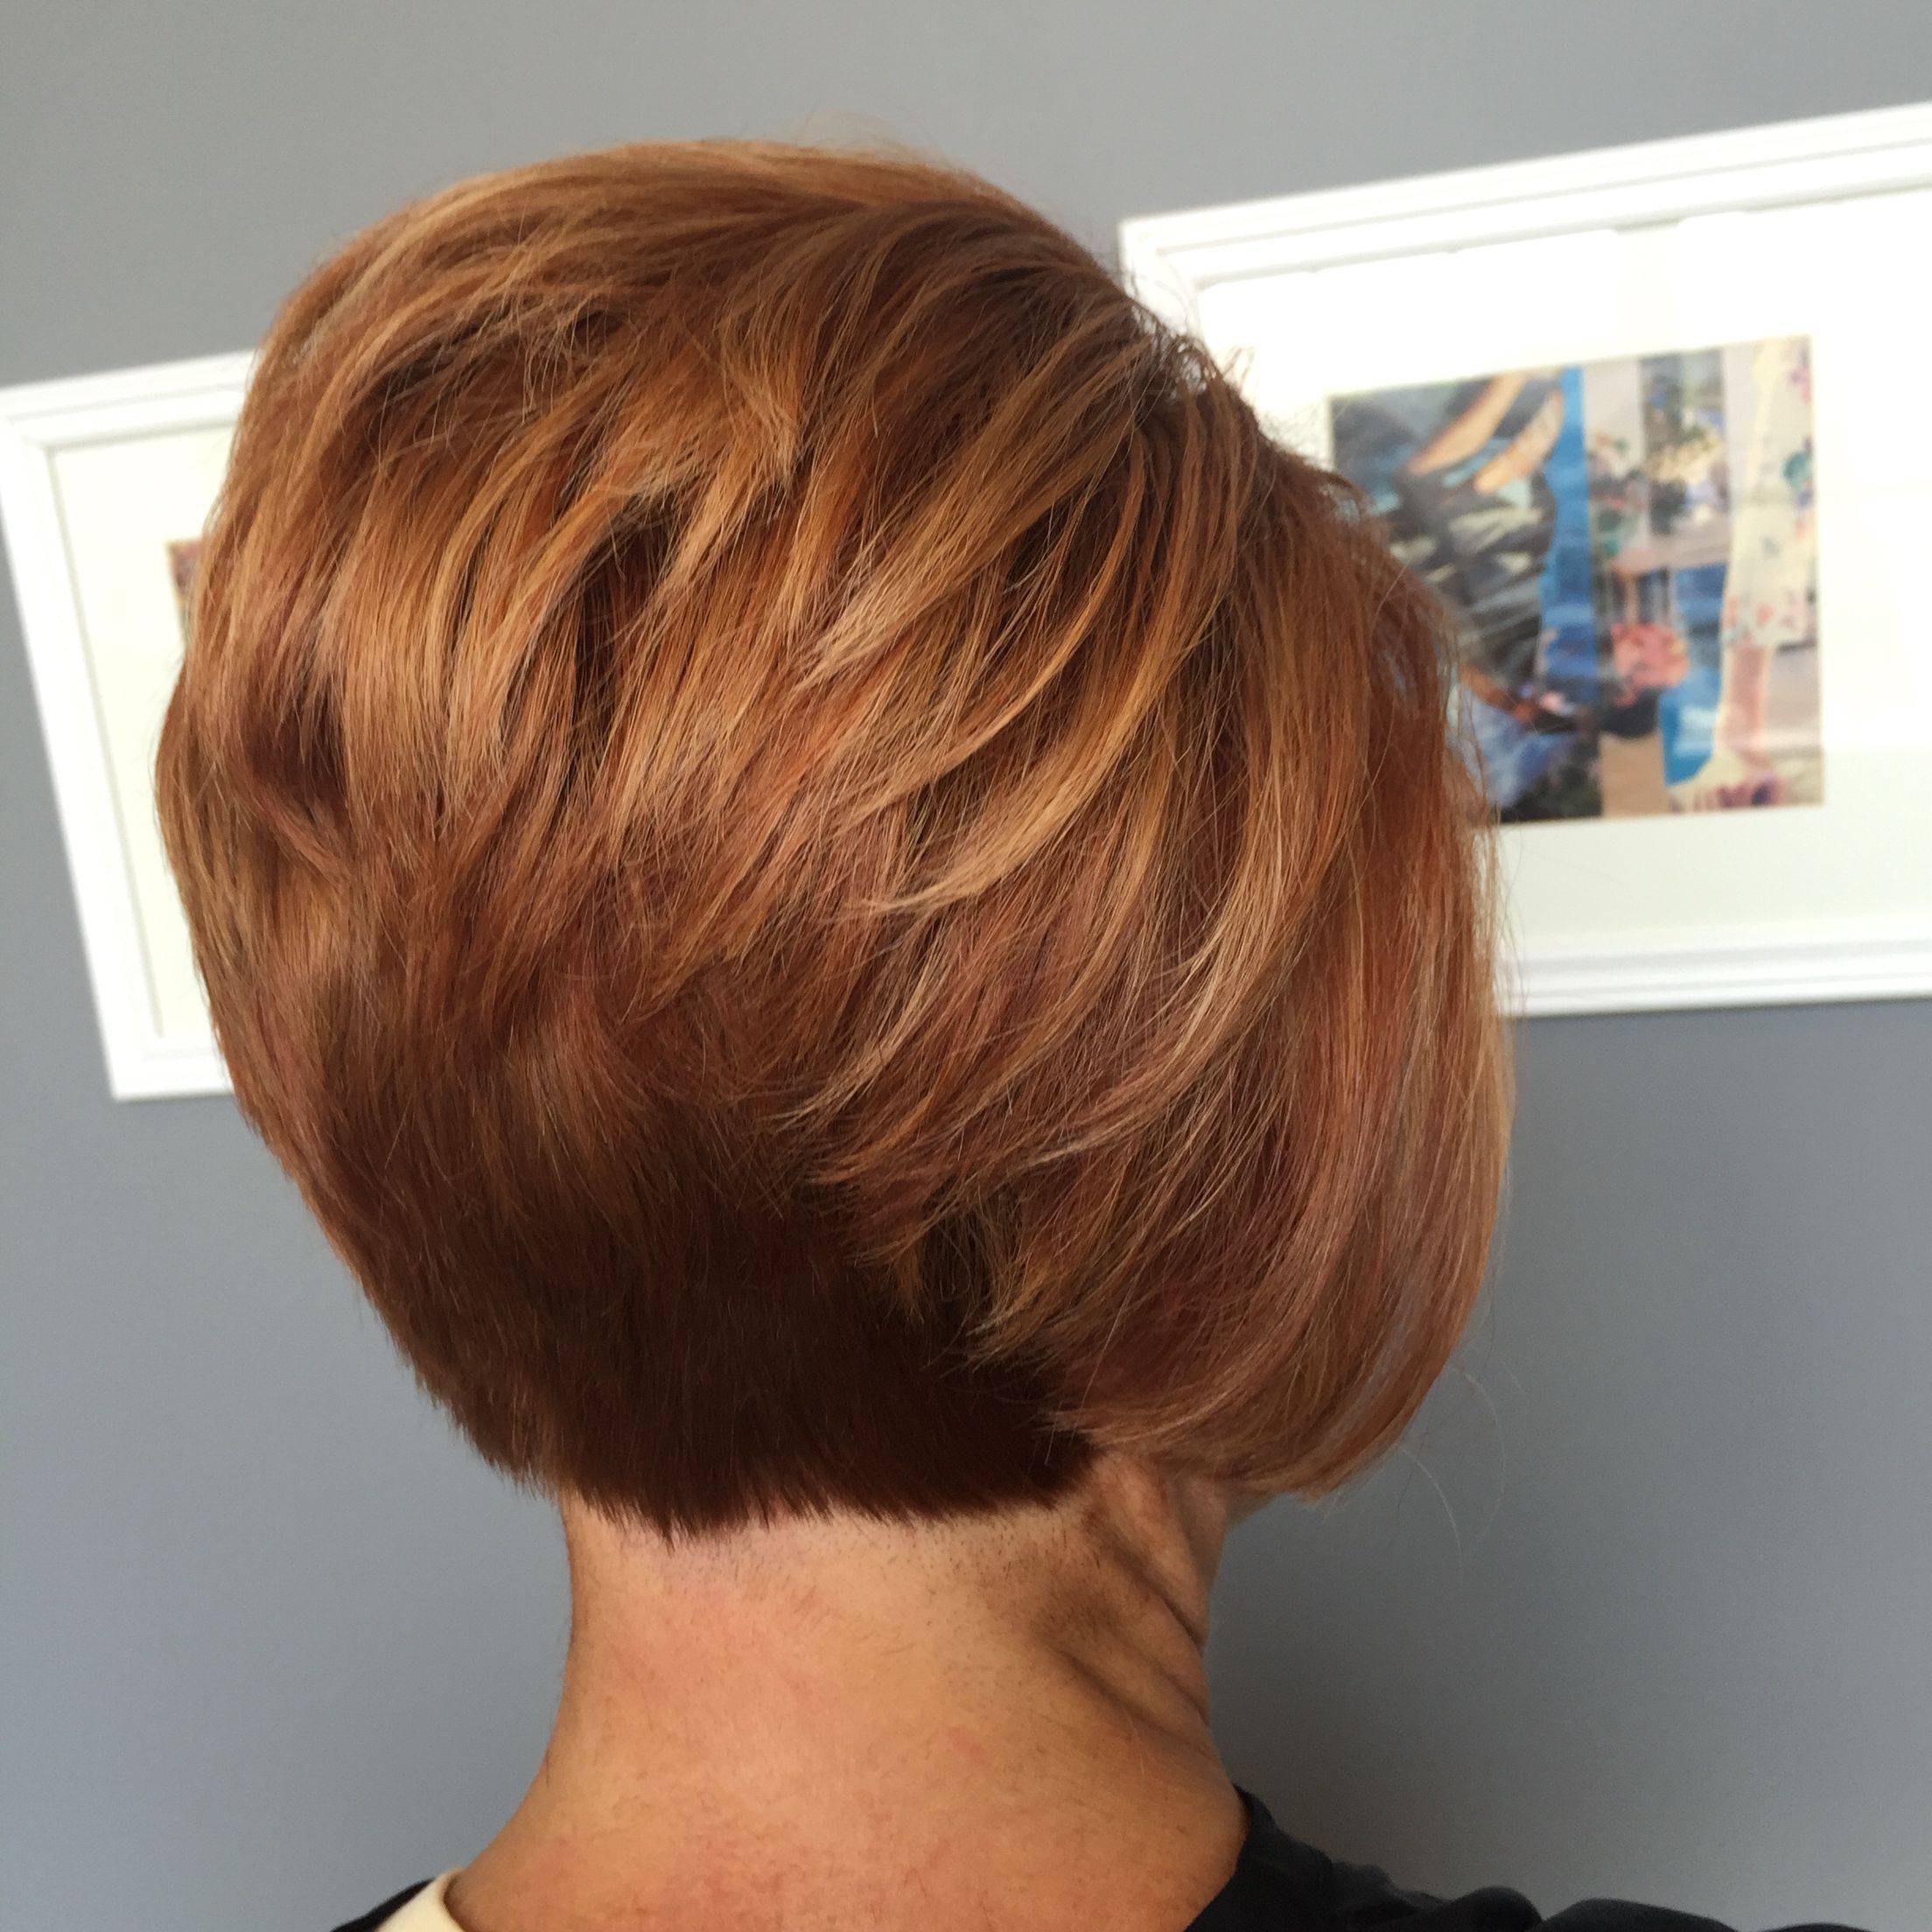 Short Red Stacked Bob … | Pinteres… Intended For Most Current Short Stacked Pixie Hairstyles (View 12 of 15)